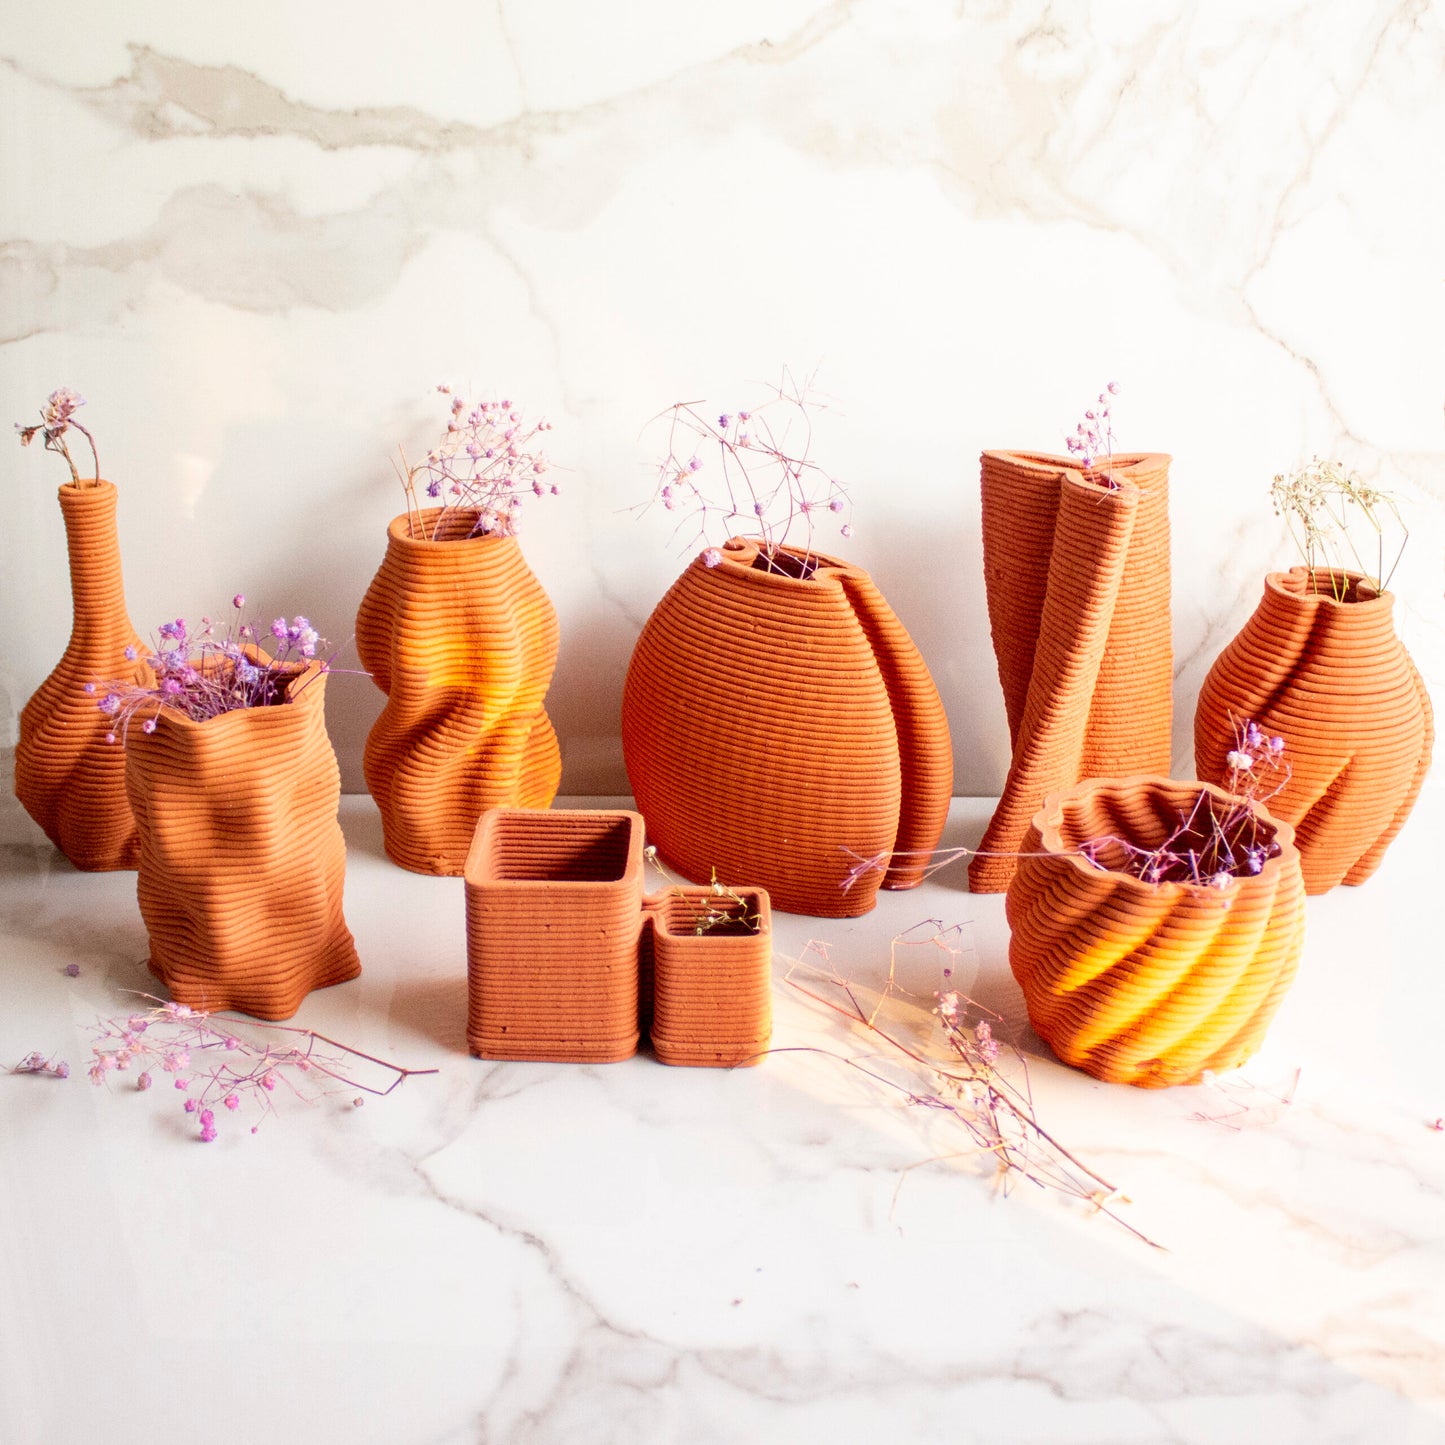 The Brown and Twisted Vol. I Vase